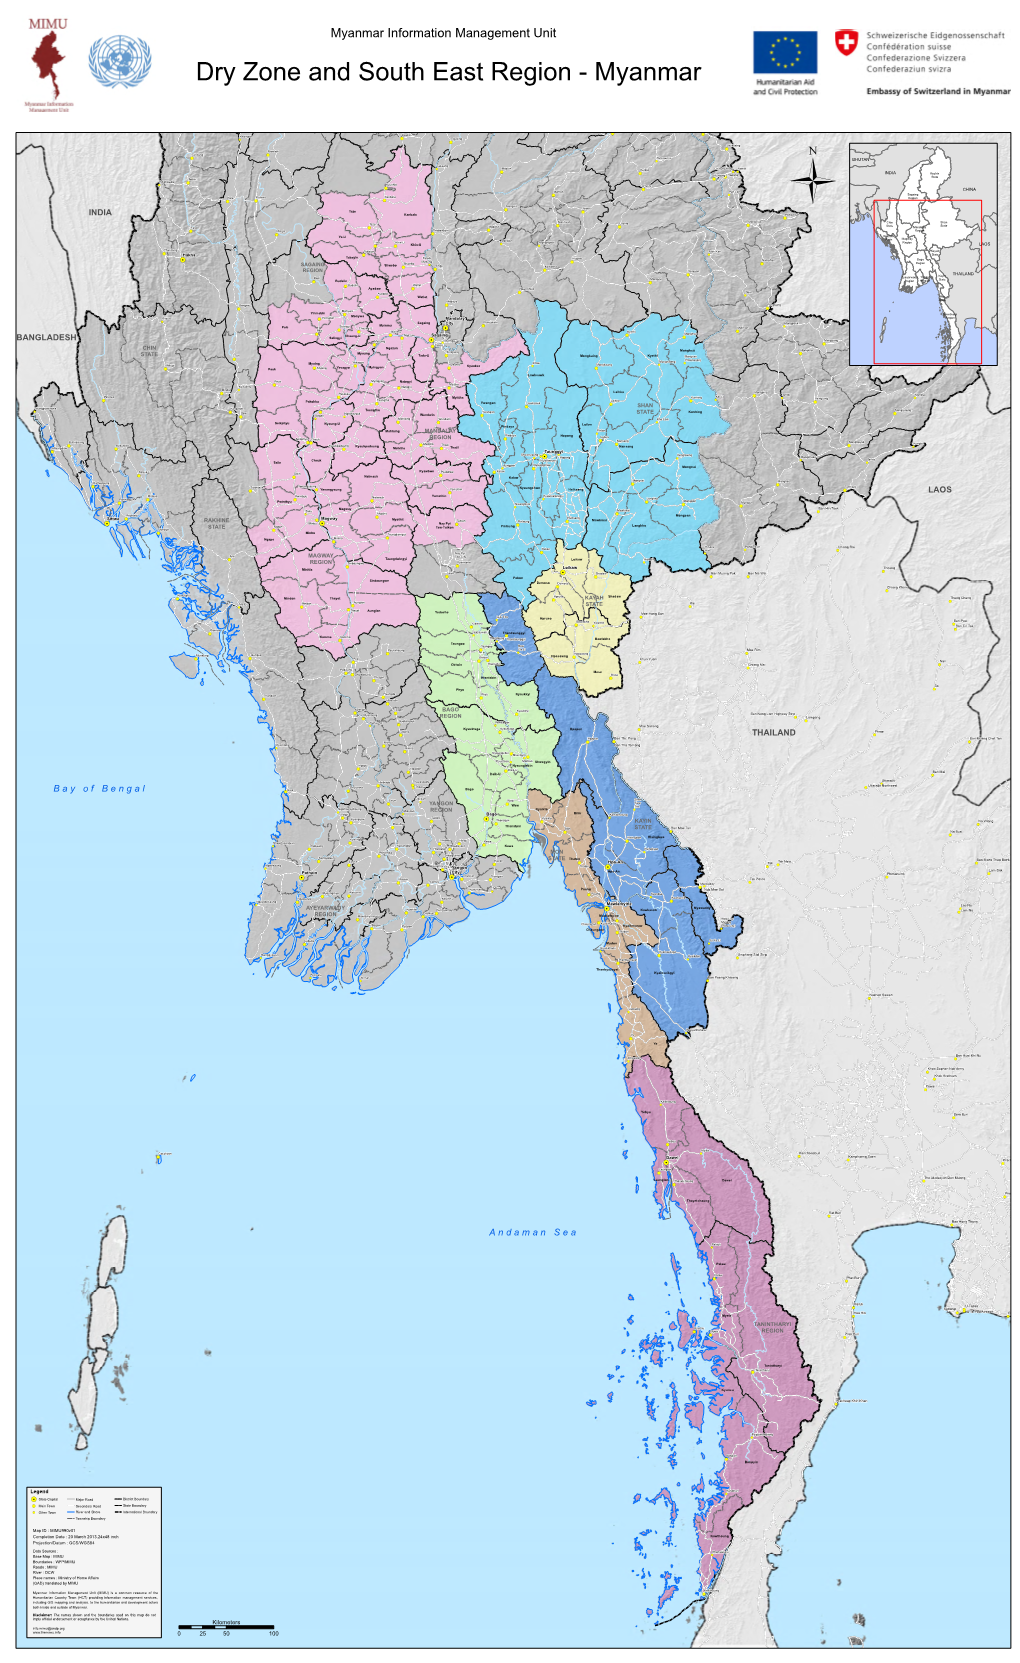 Dry Zone and South East Region - Myanmar